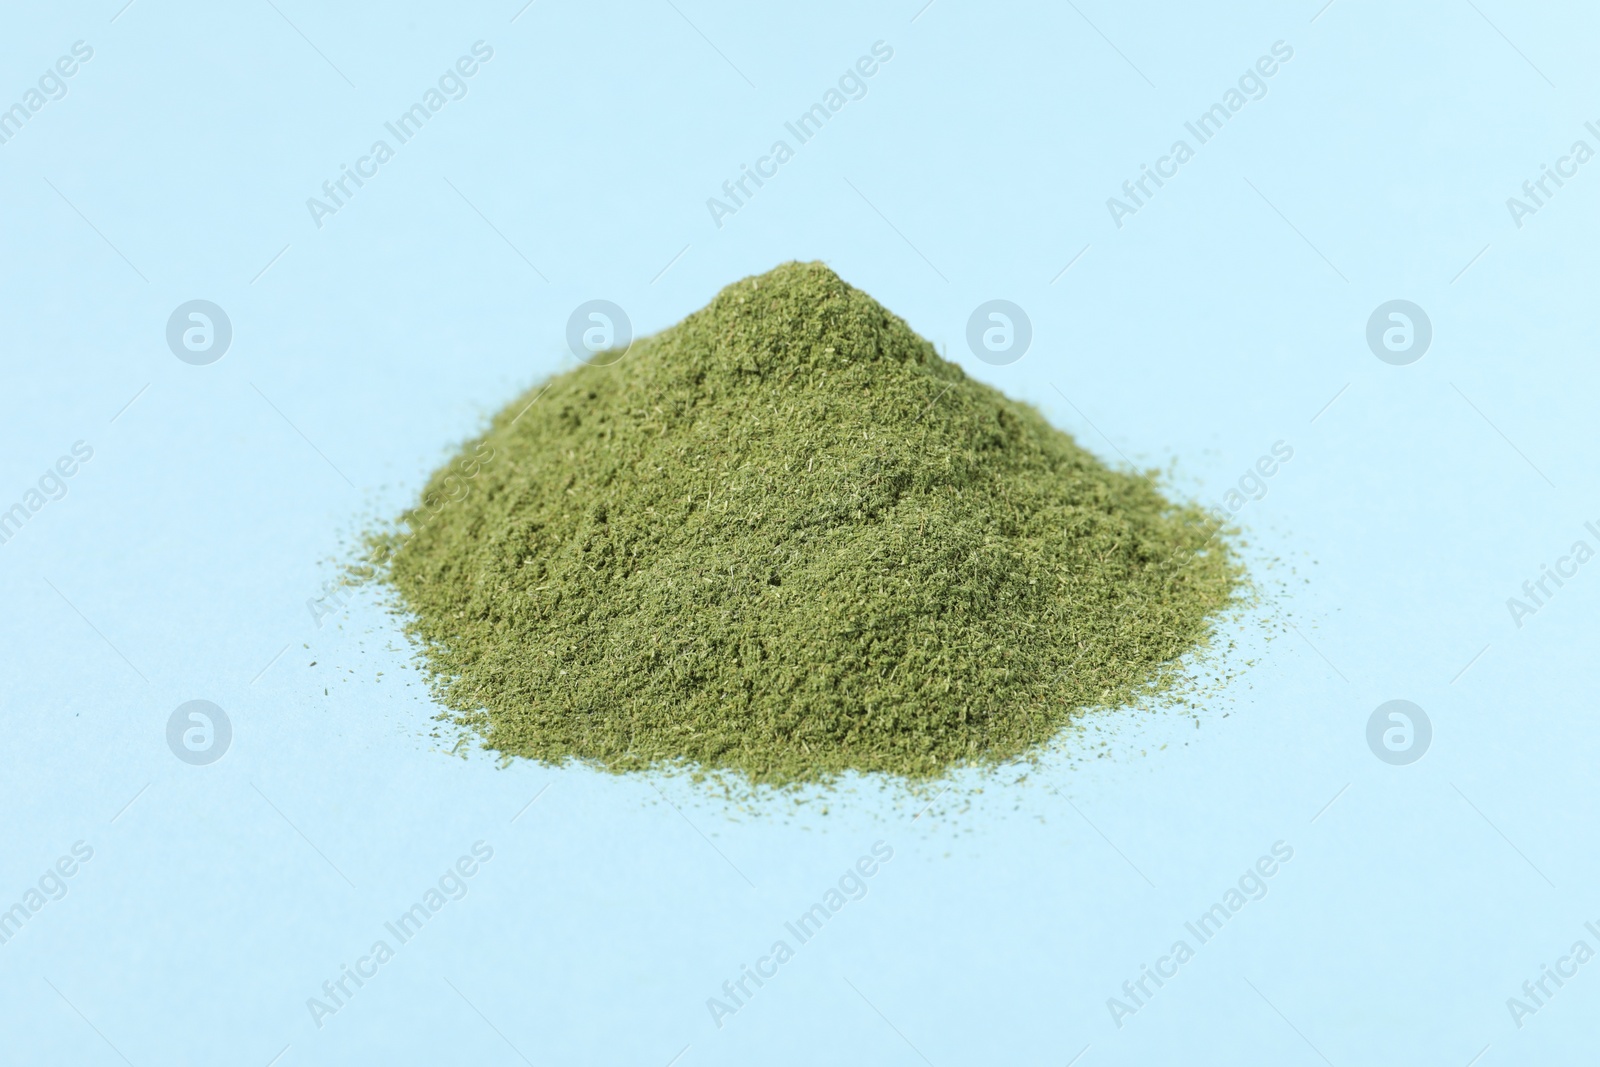 Photo of Pile of wheat grass powder on light blue table, closeup